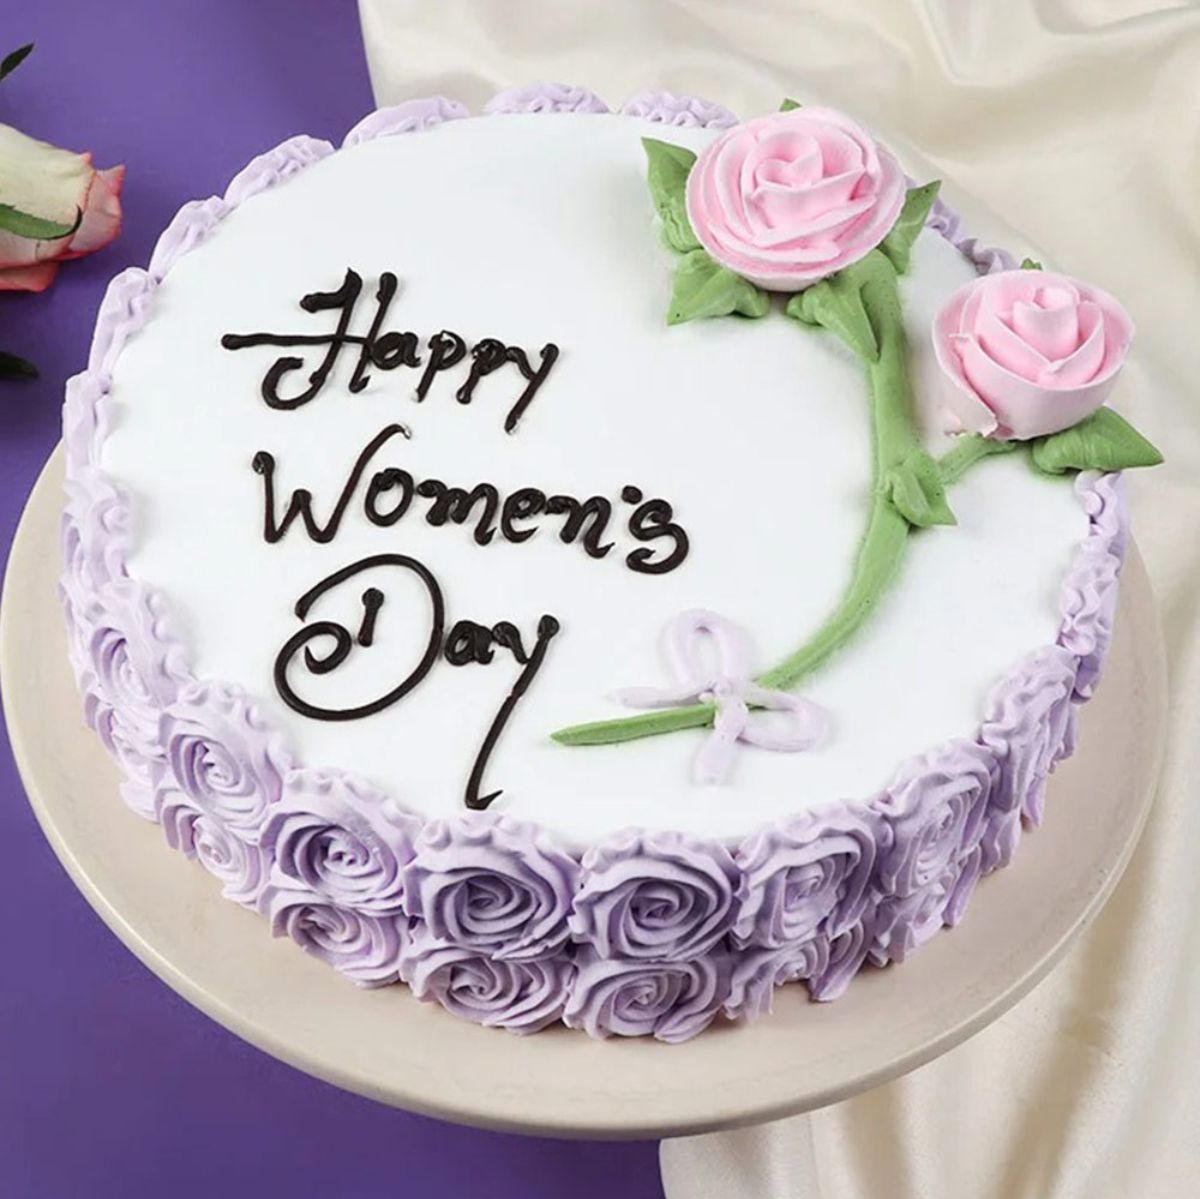 Blooming Women's Day Choco Mouse Cake